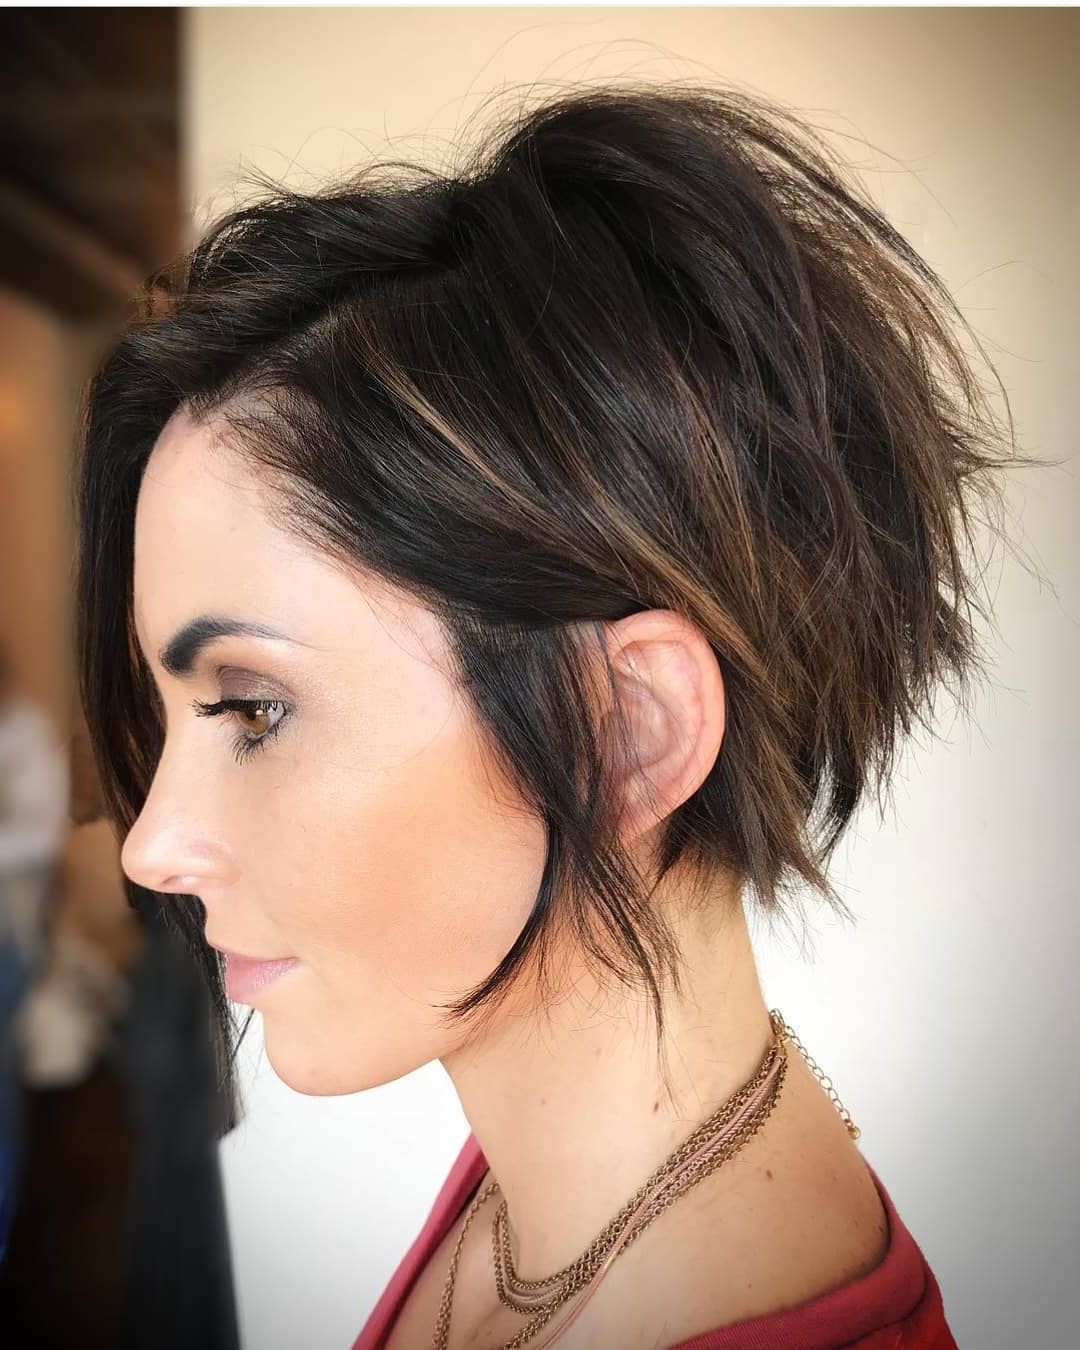 10 Pixie Haircut Inspiration, Latest Short Hair Styles For Women 2019 Intended For Favorite Bright And Beautiful Pixie Bob Hairstyles (View 12 of 20)